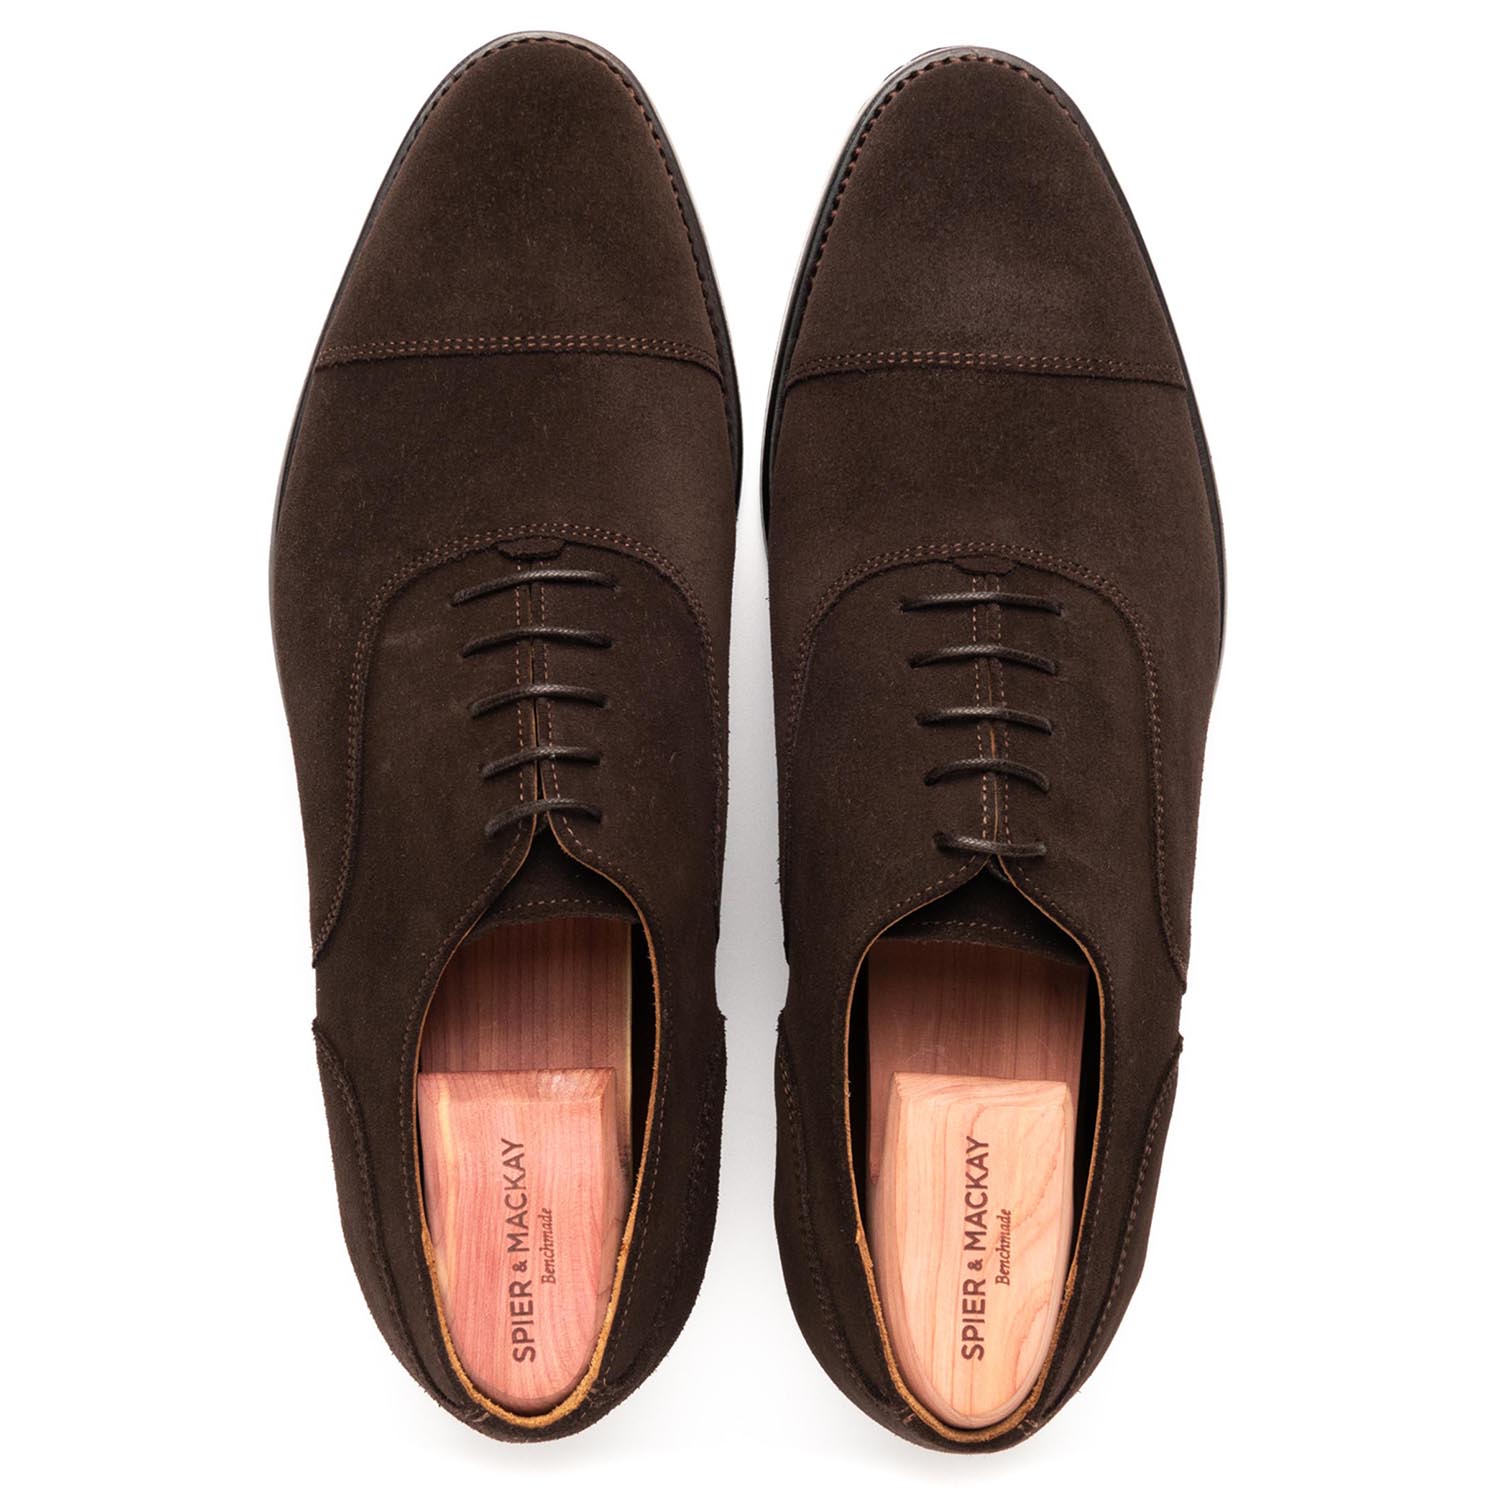 Business Casual Shoes (Best Shoes to Wear to the Office) - Sharp ...